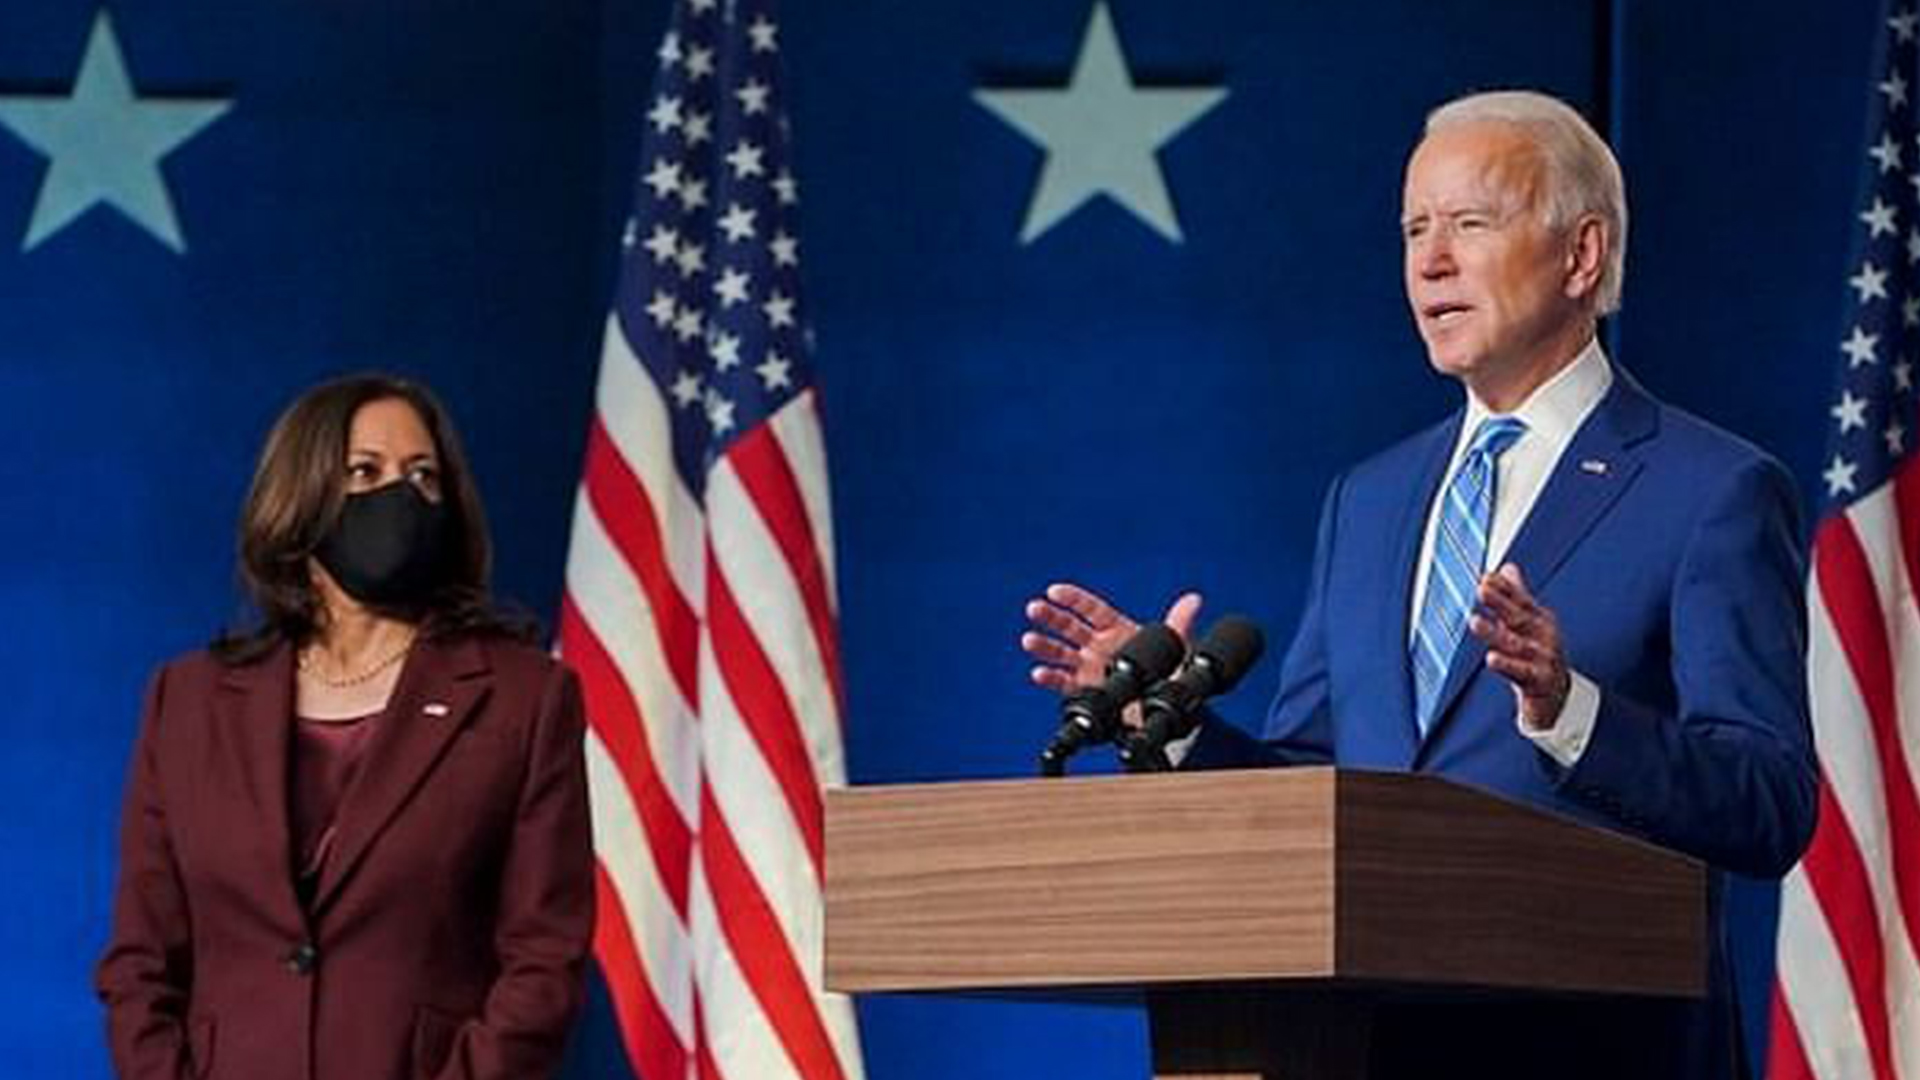 Biden announces his team, saying American is back